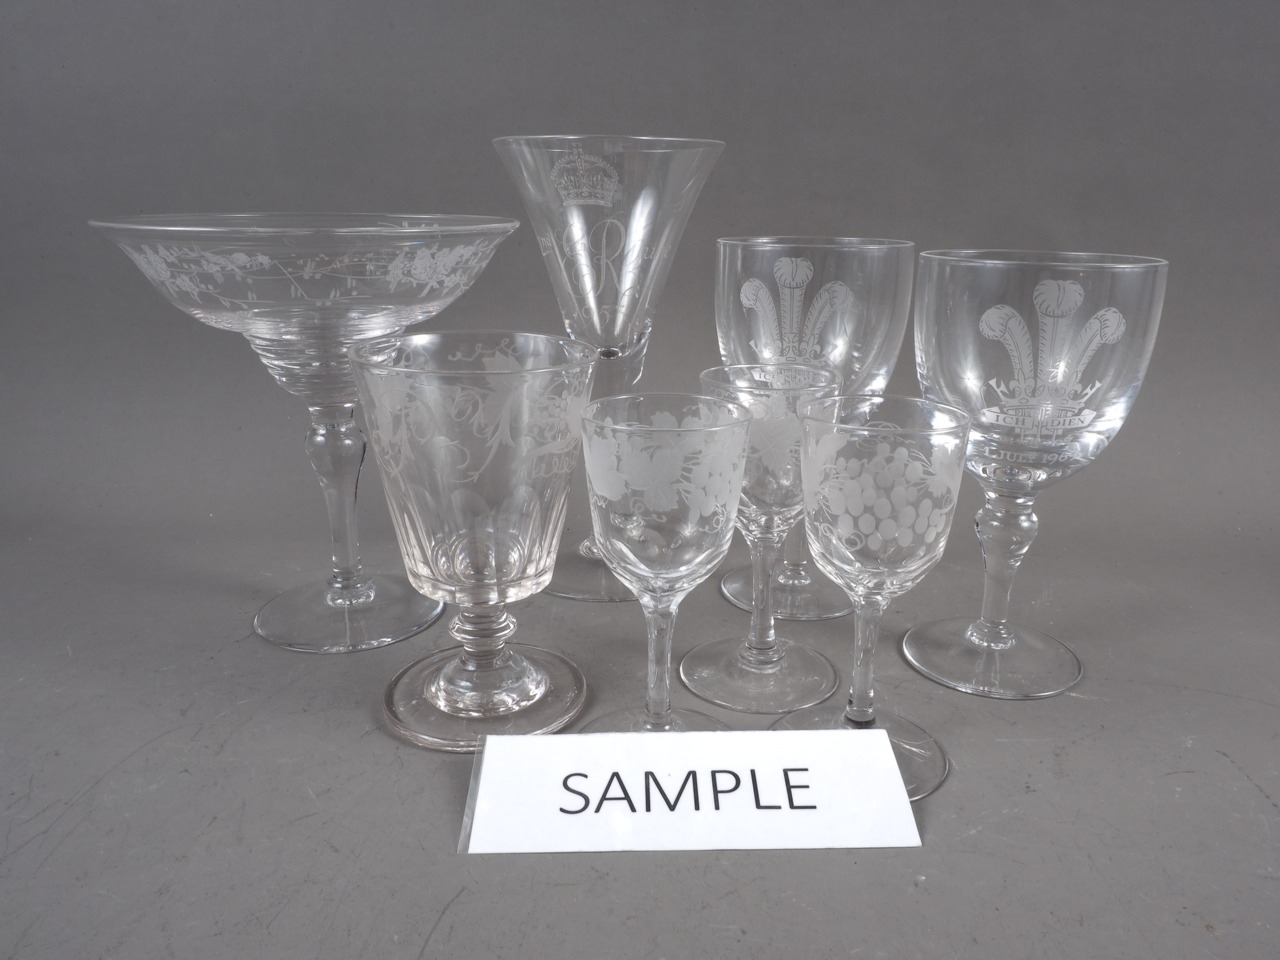 A 1953 Coronation ale glass, a 20th century engraved goblet, and other cut glass and engraved